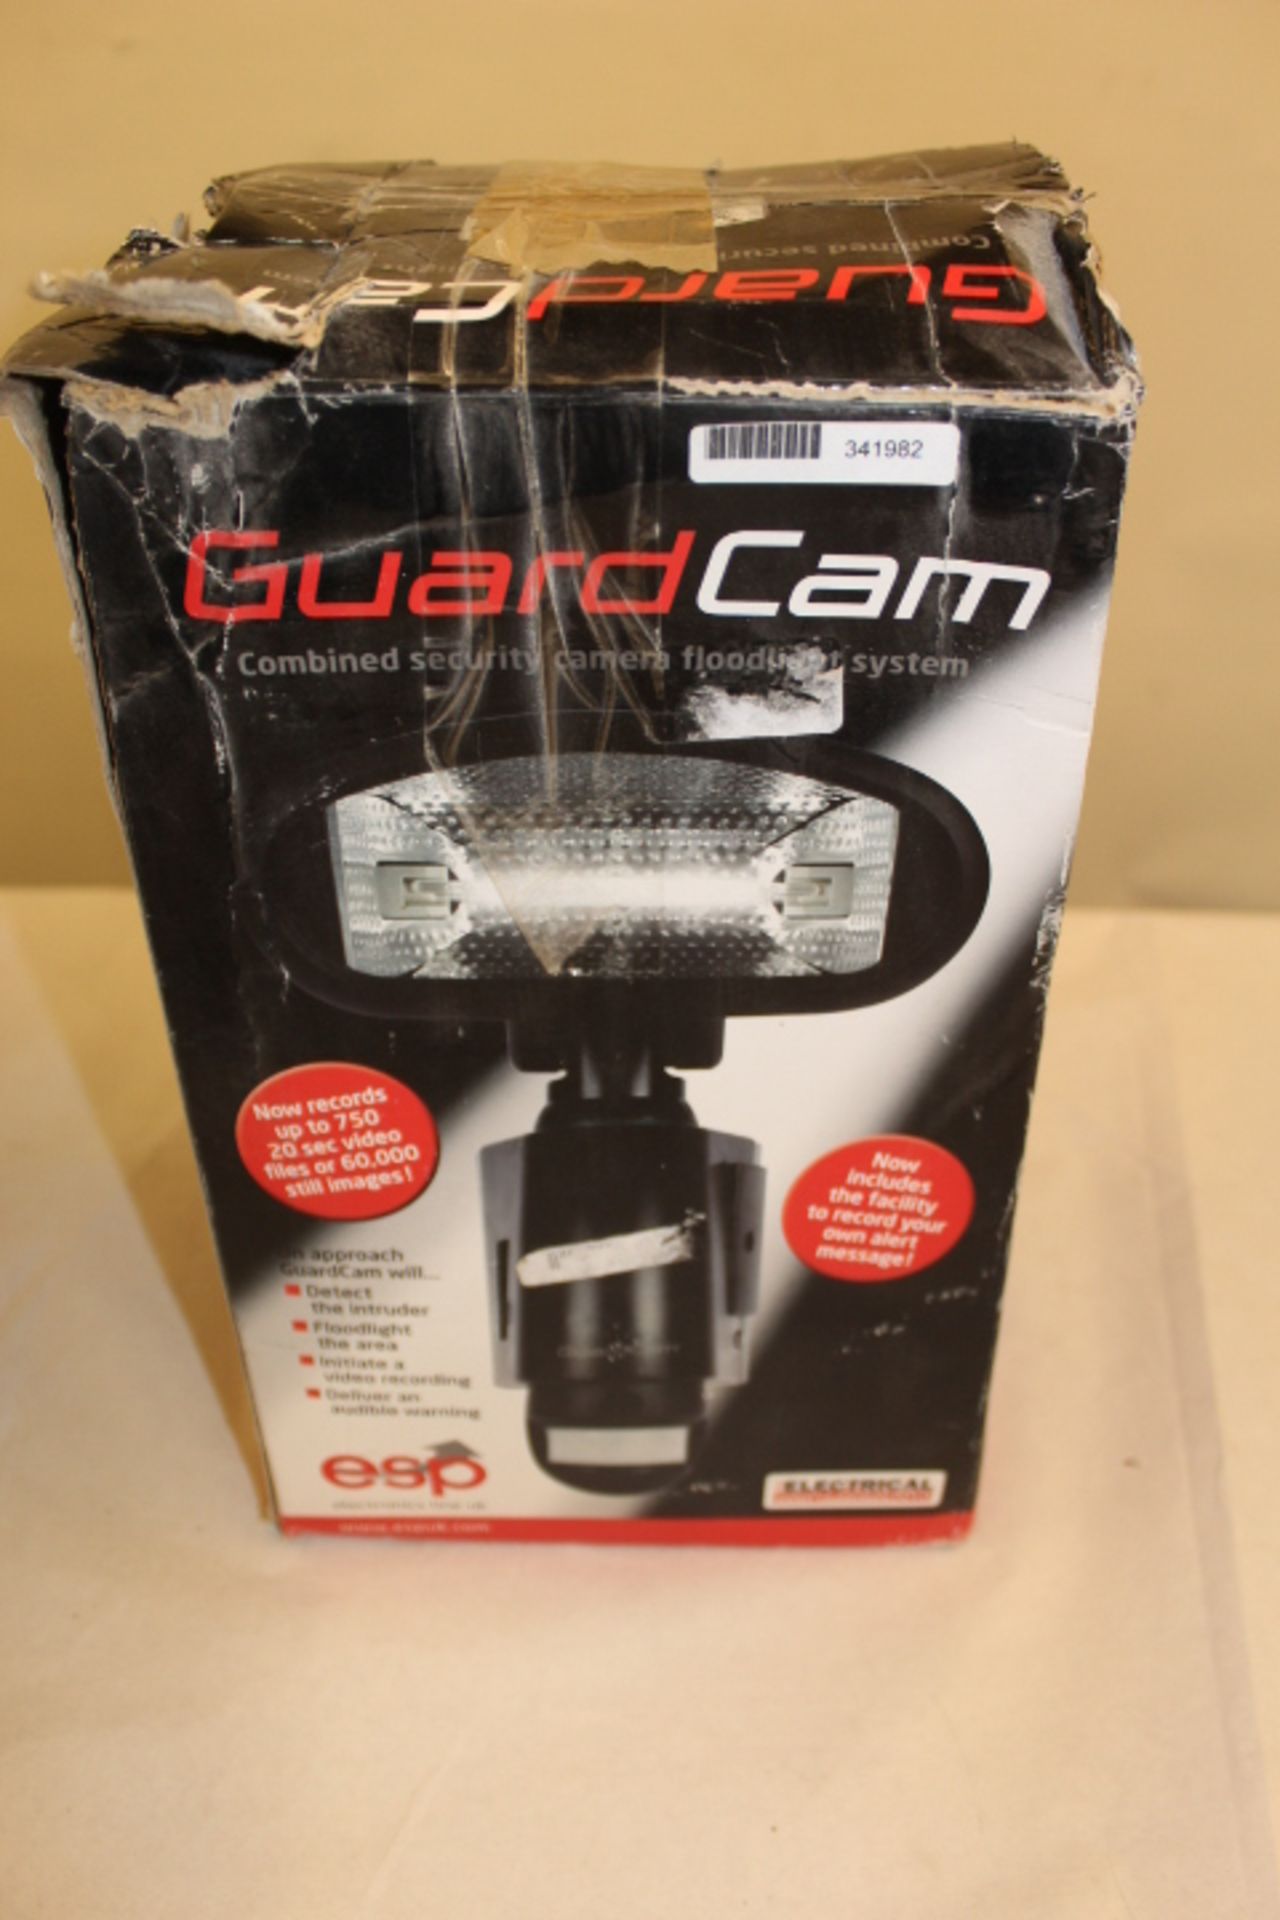 Guard Cam Pir Floodlight With Video Recording Capabilities